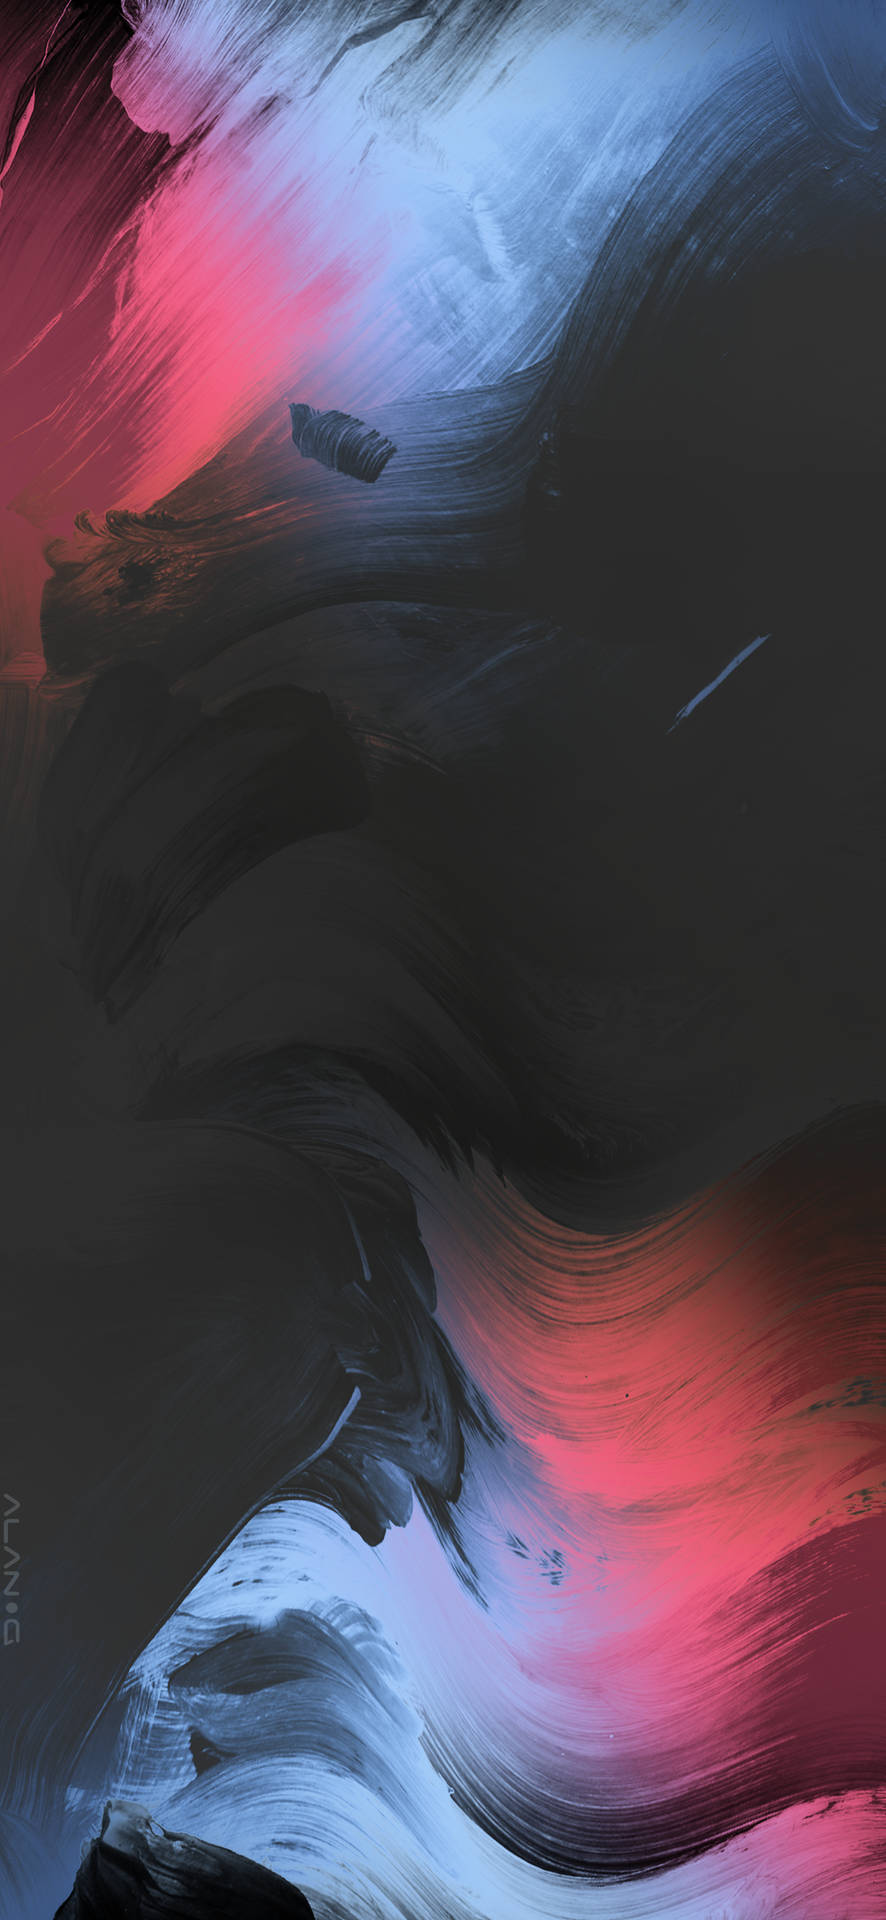 Sleek and Modern OnePlus 9 Pro Showcased in Light and Dark Abstract Background Wallpaper